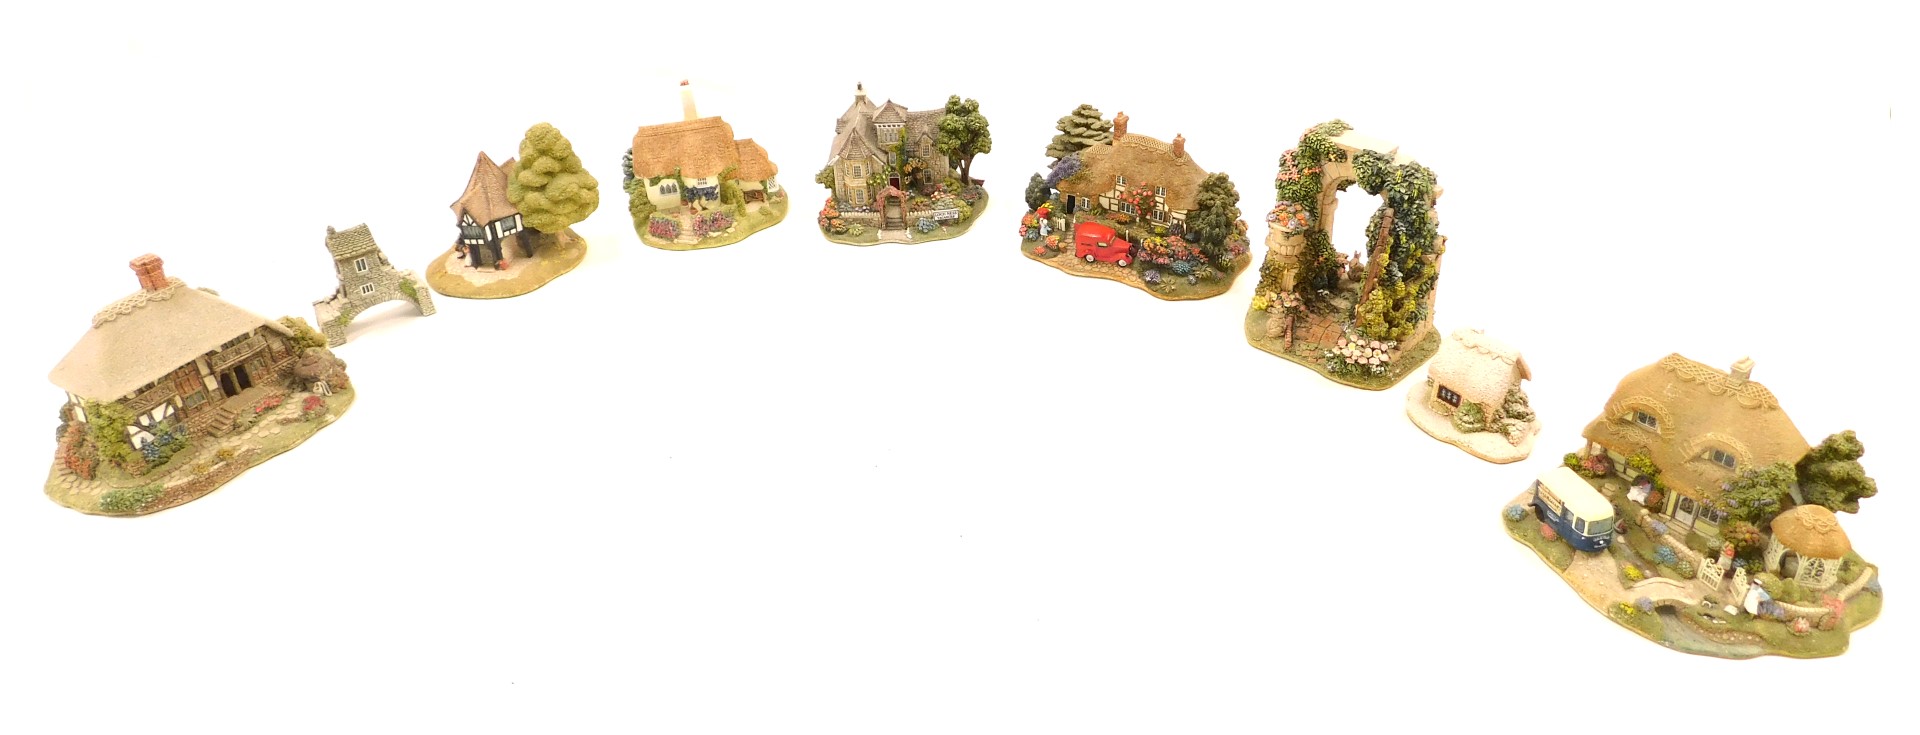 A collection of Lilliput Lane cottages, to include Old Shop at Bignor, Nature's Doorway, Pen Pals, e